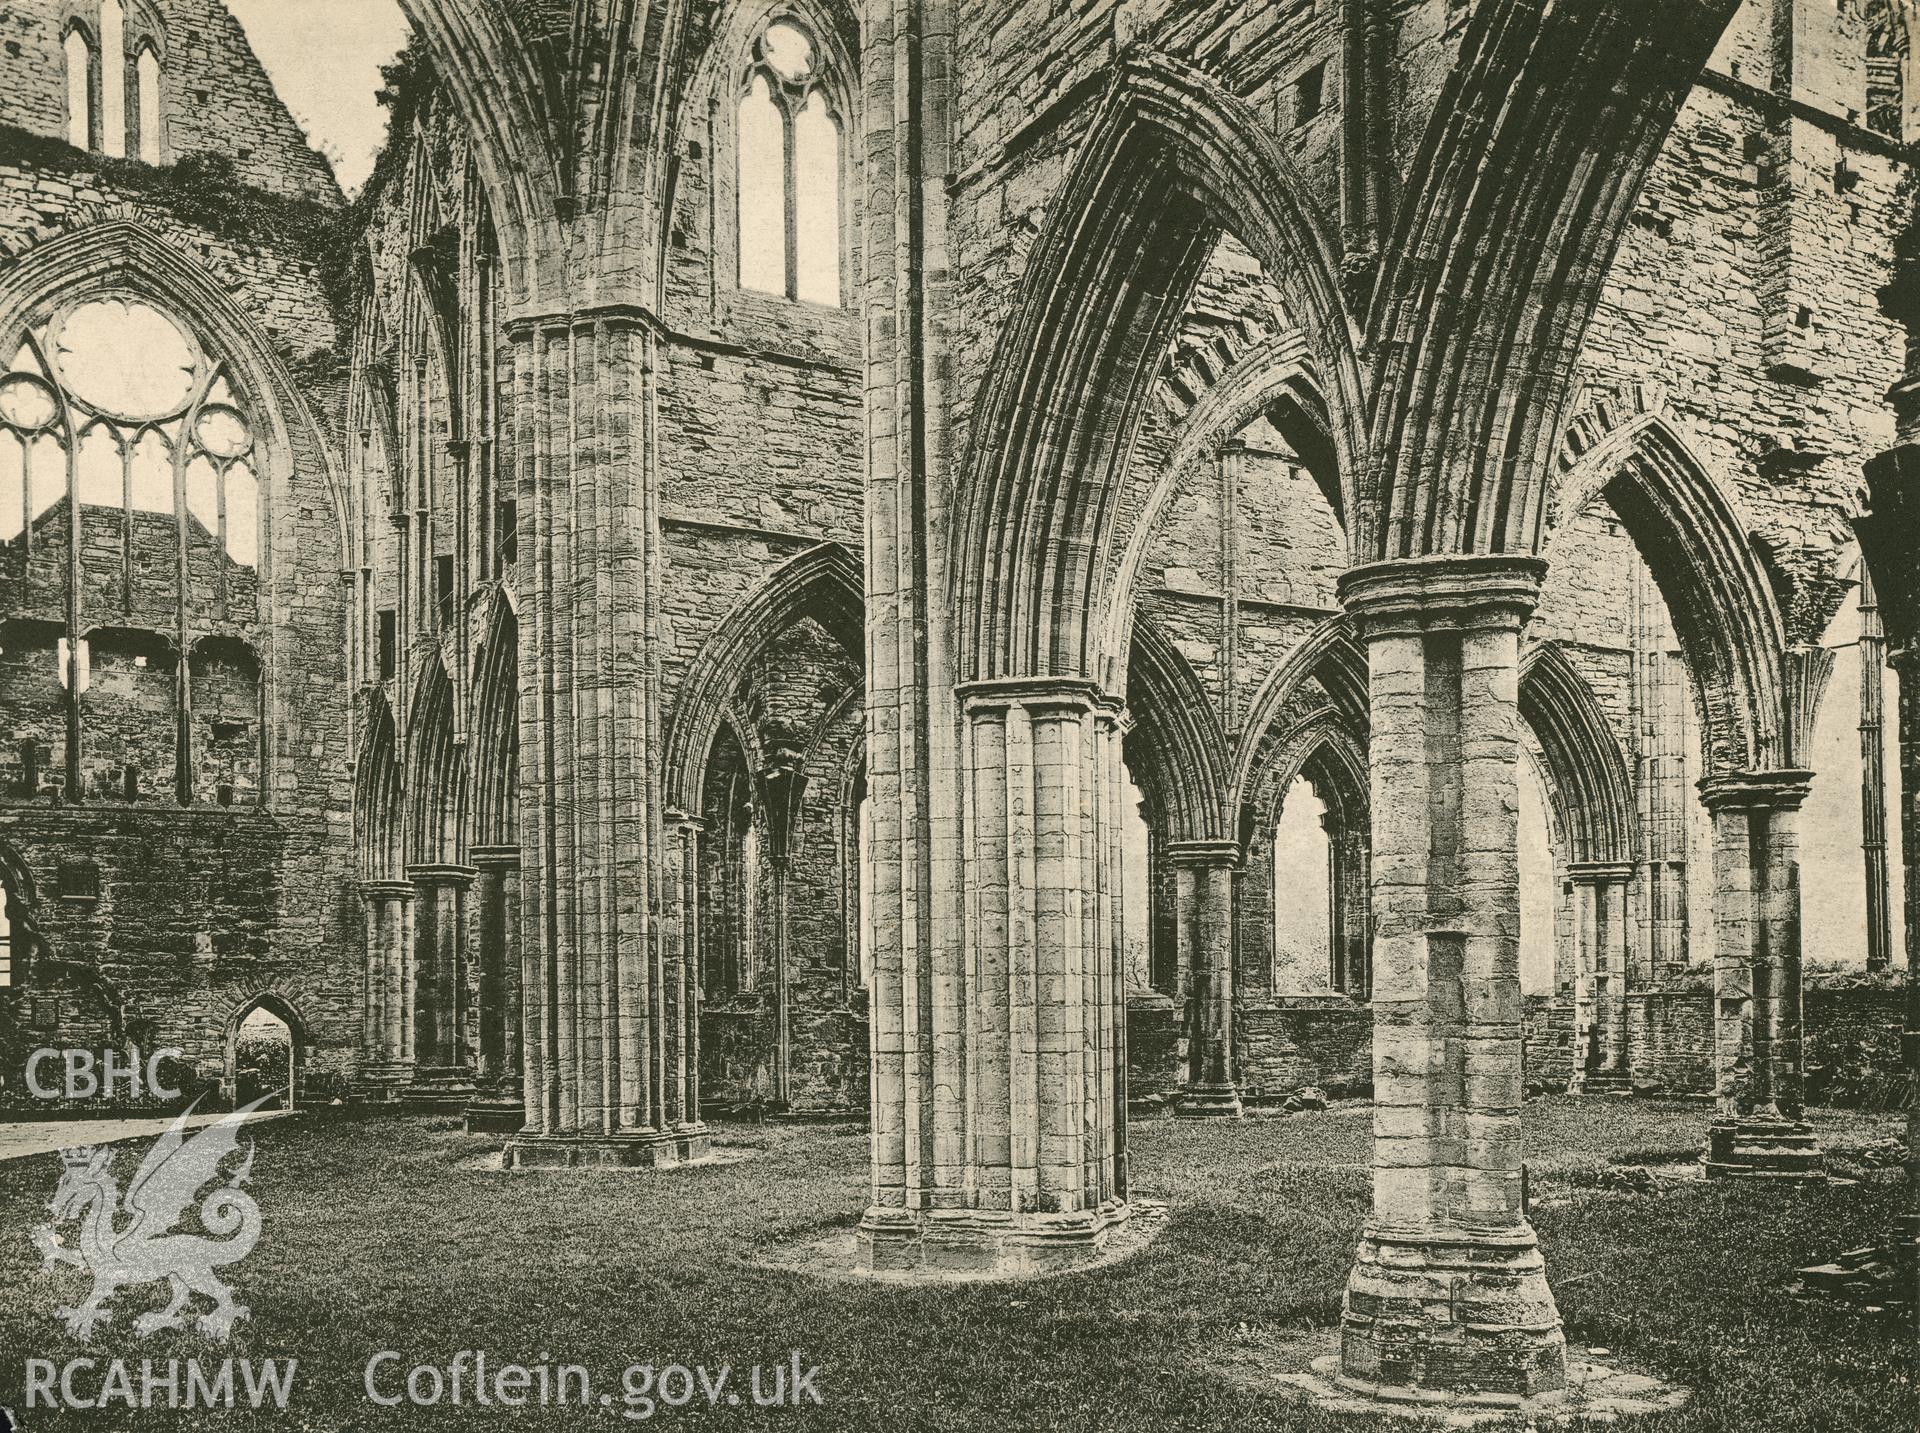 Digital copy of a carbon print showing the north transept of Tintern Abbey.